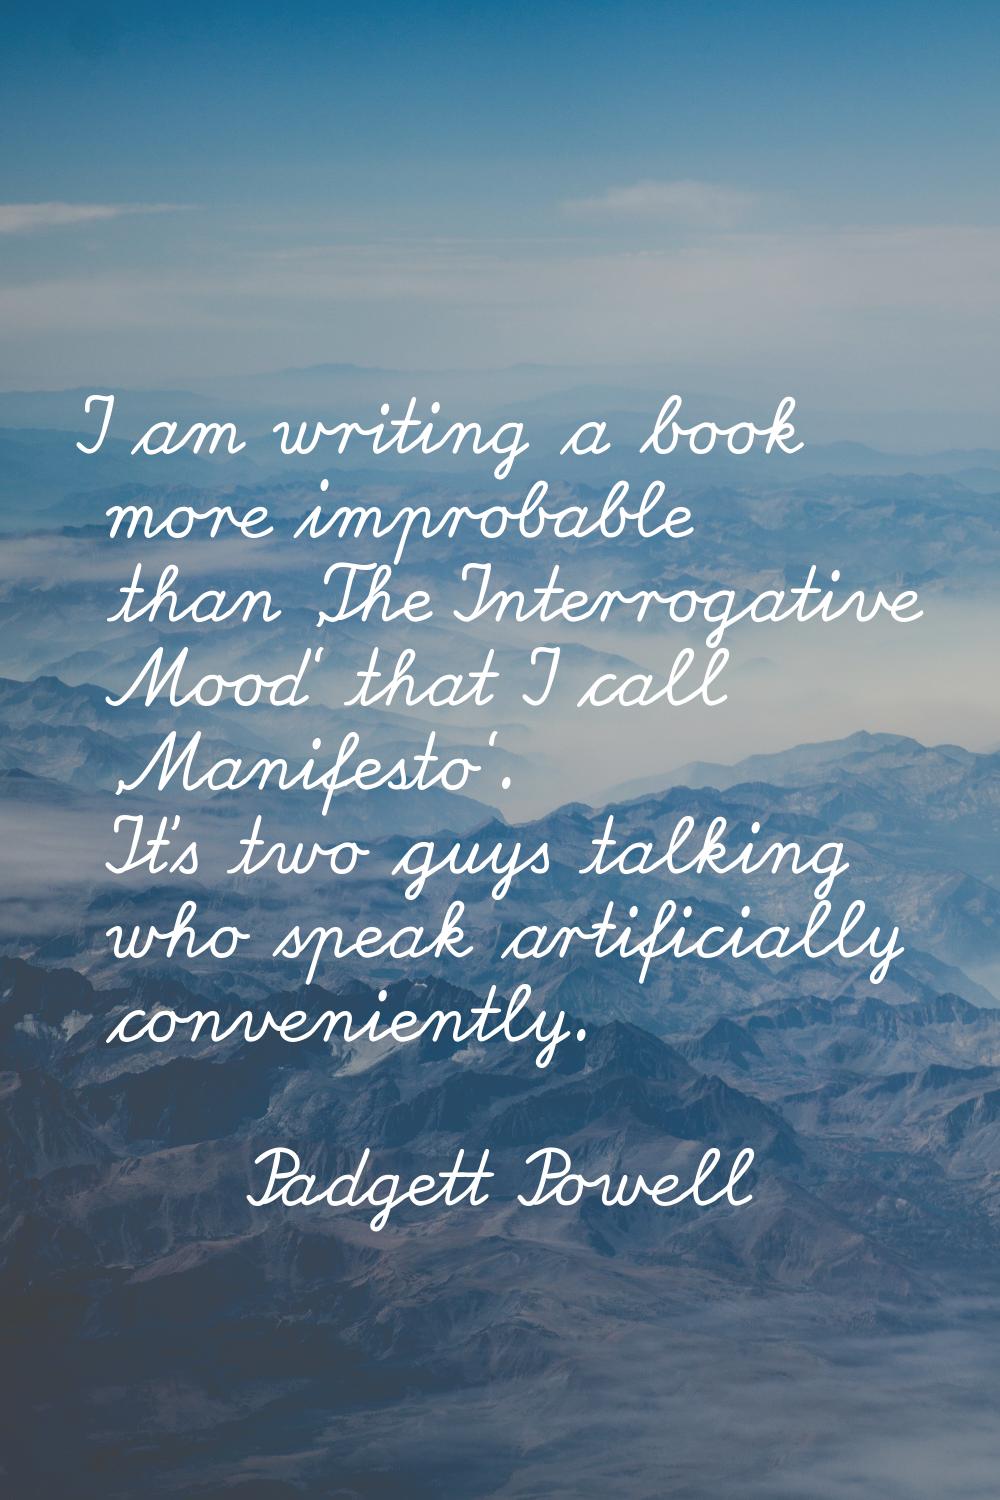 I am writing a book more improbable than 'The Interrogative Mood' that I call 'Manifesto'. It's two